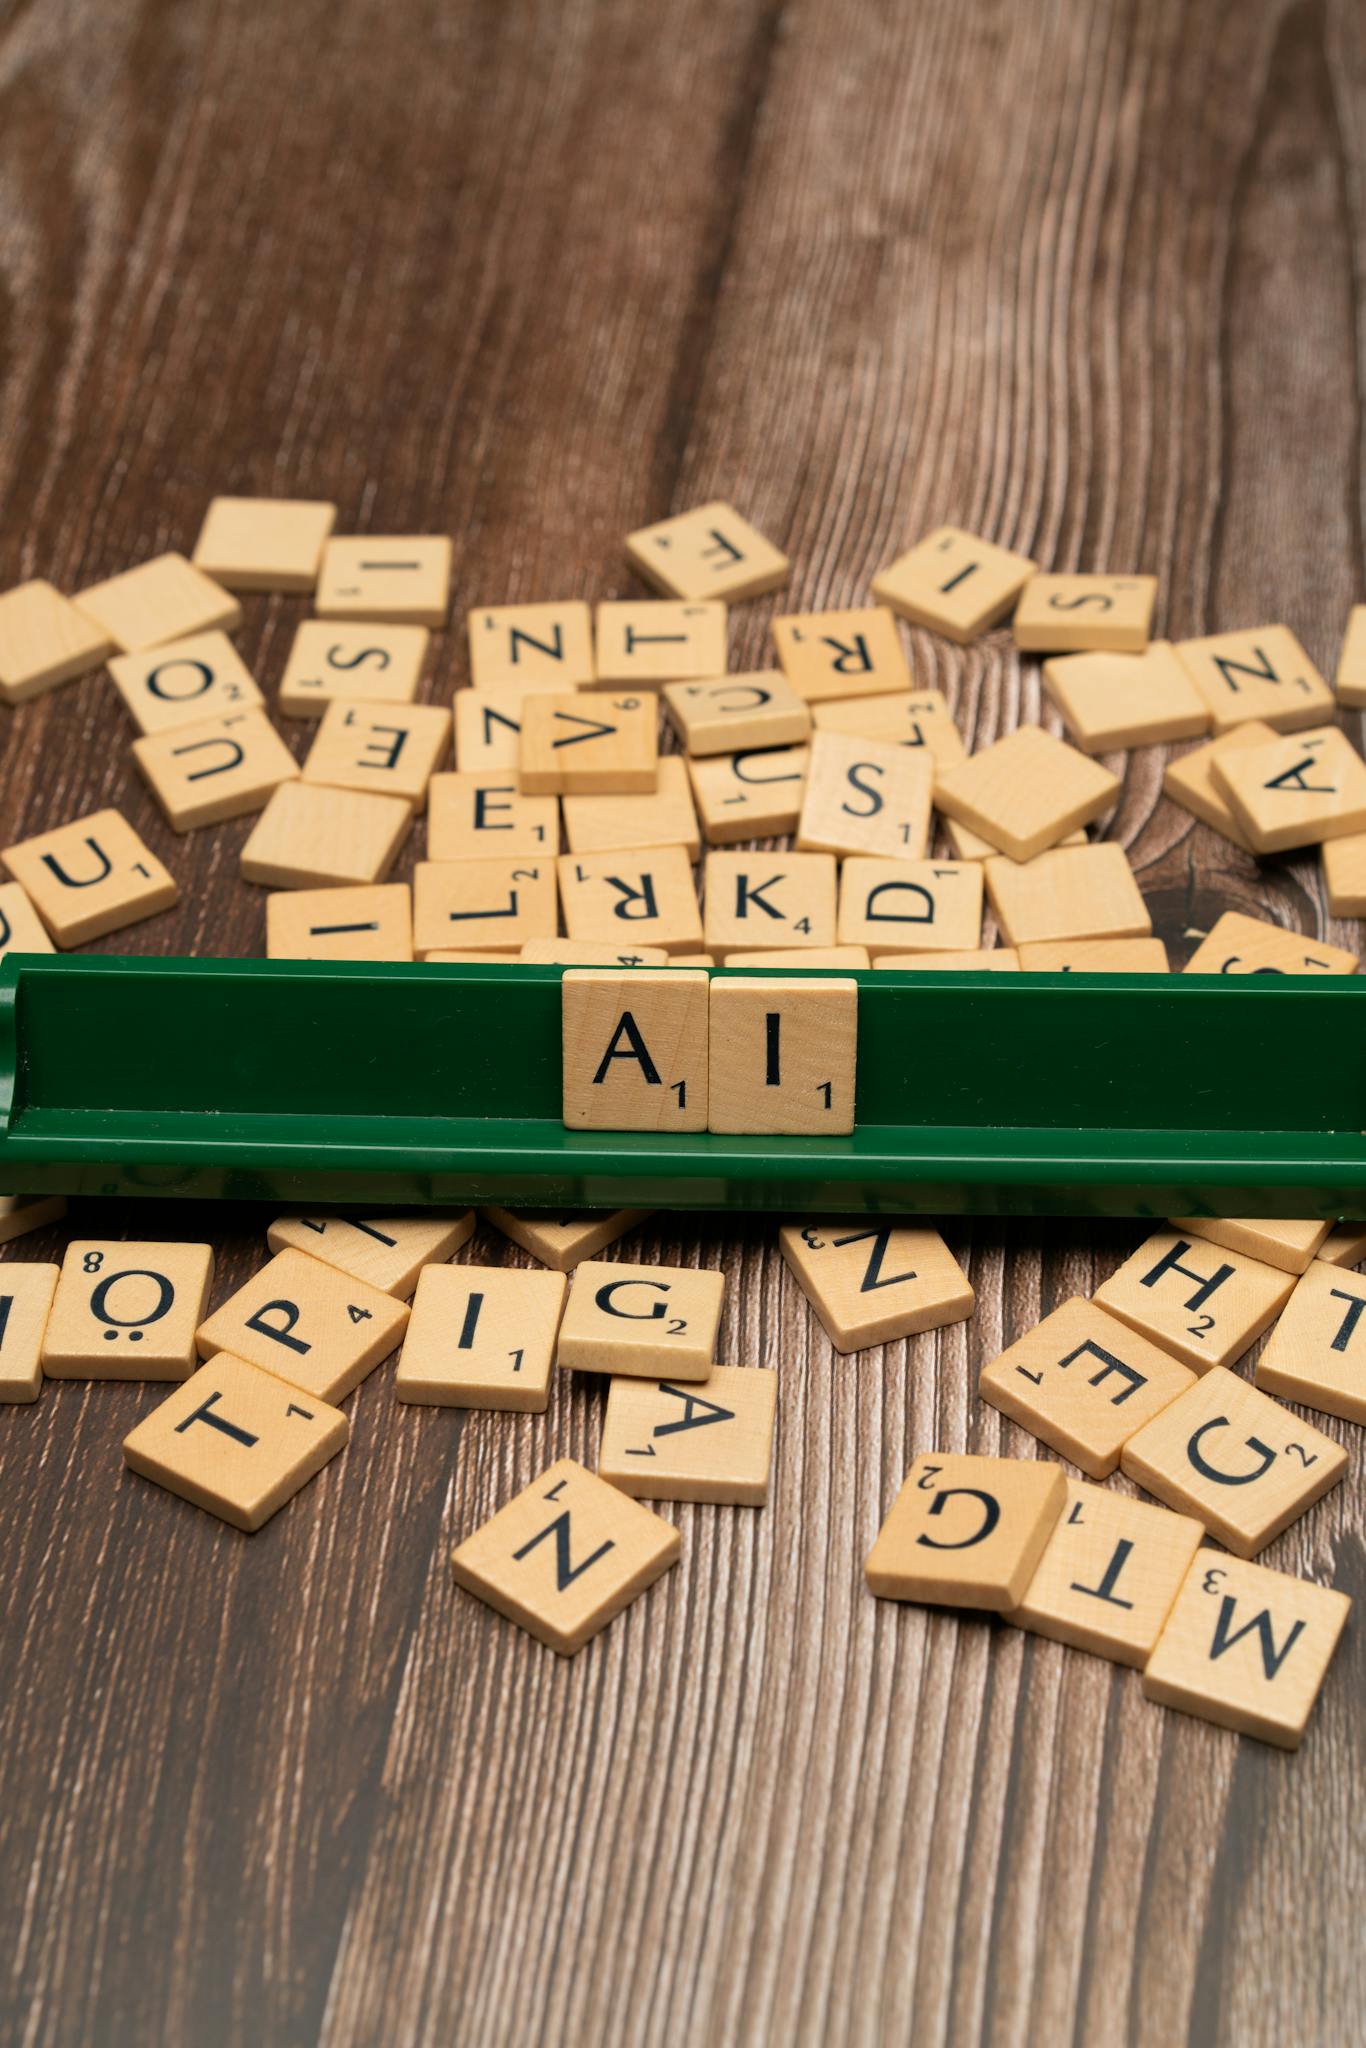 A green scrabble board with letters spelling out ai